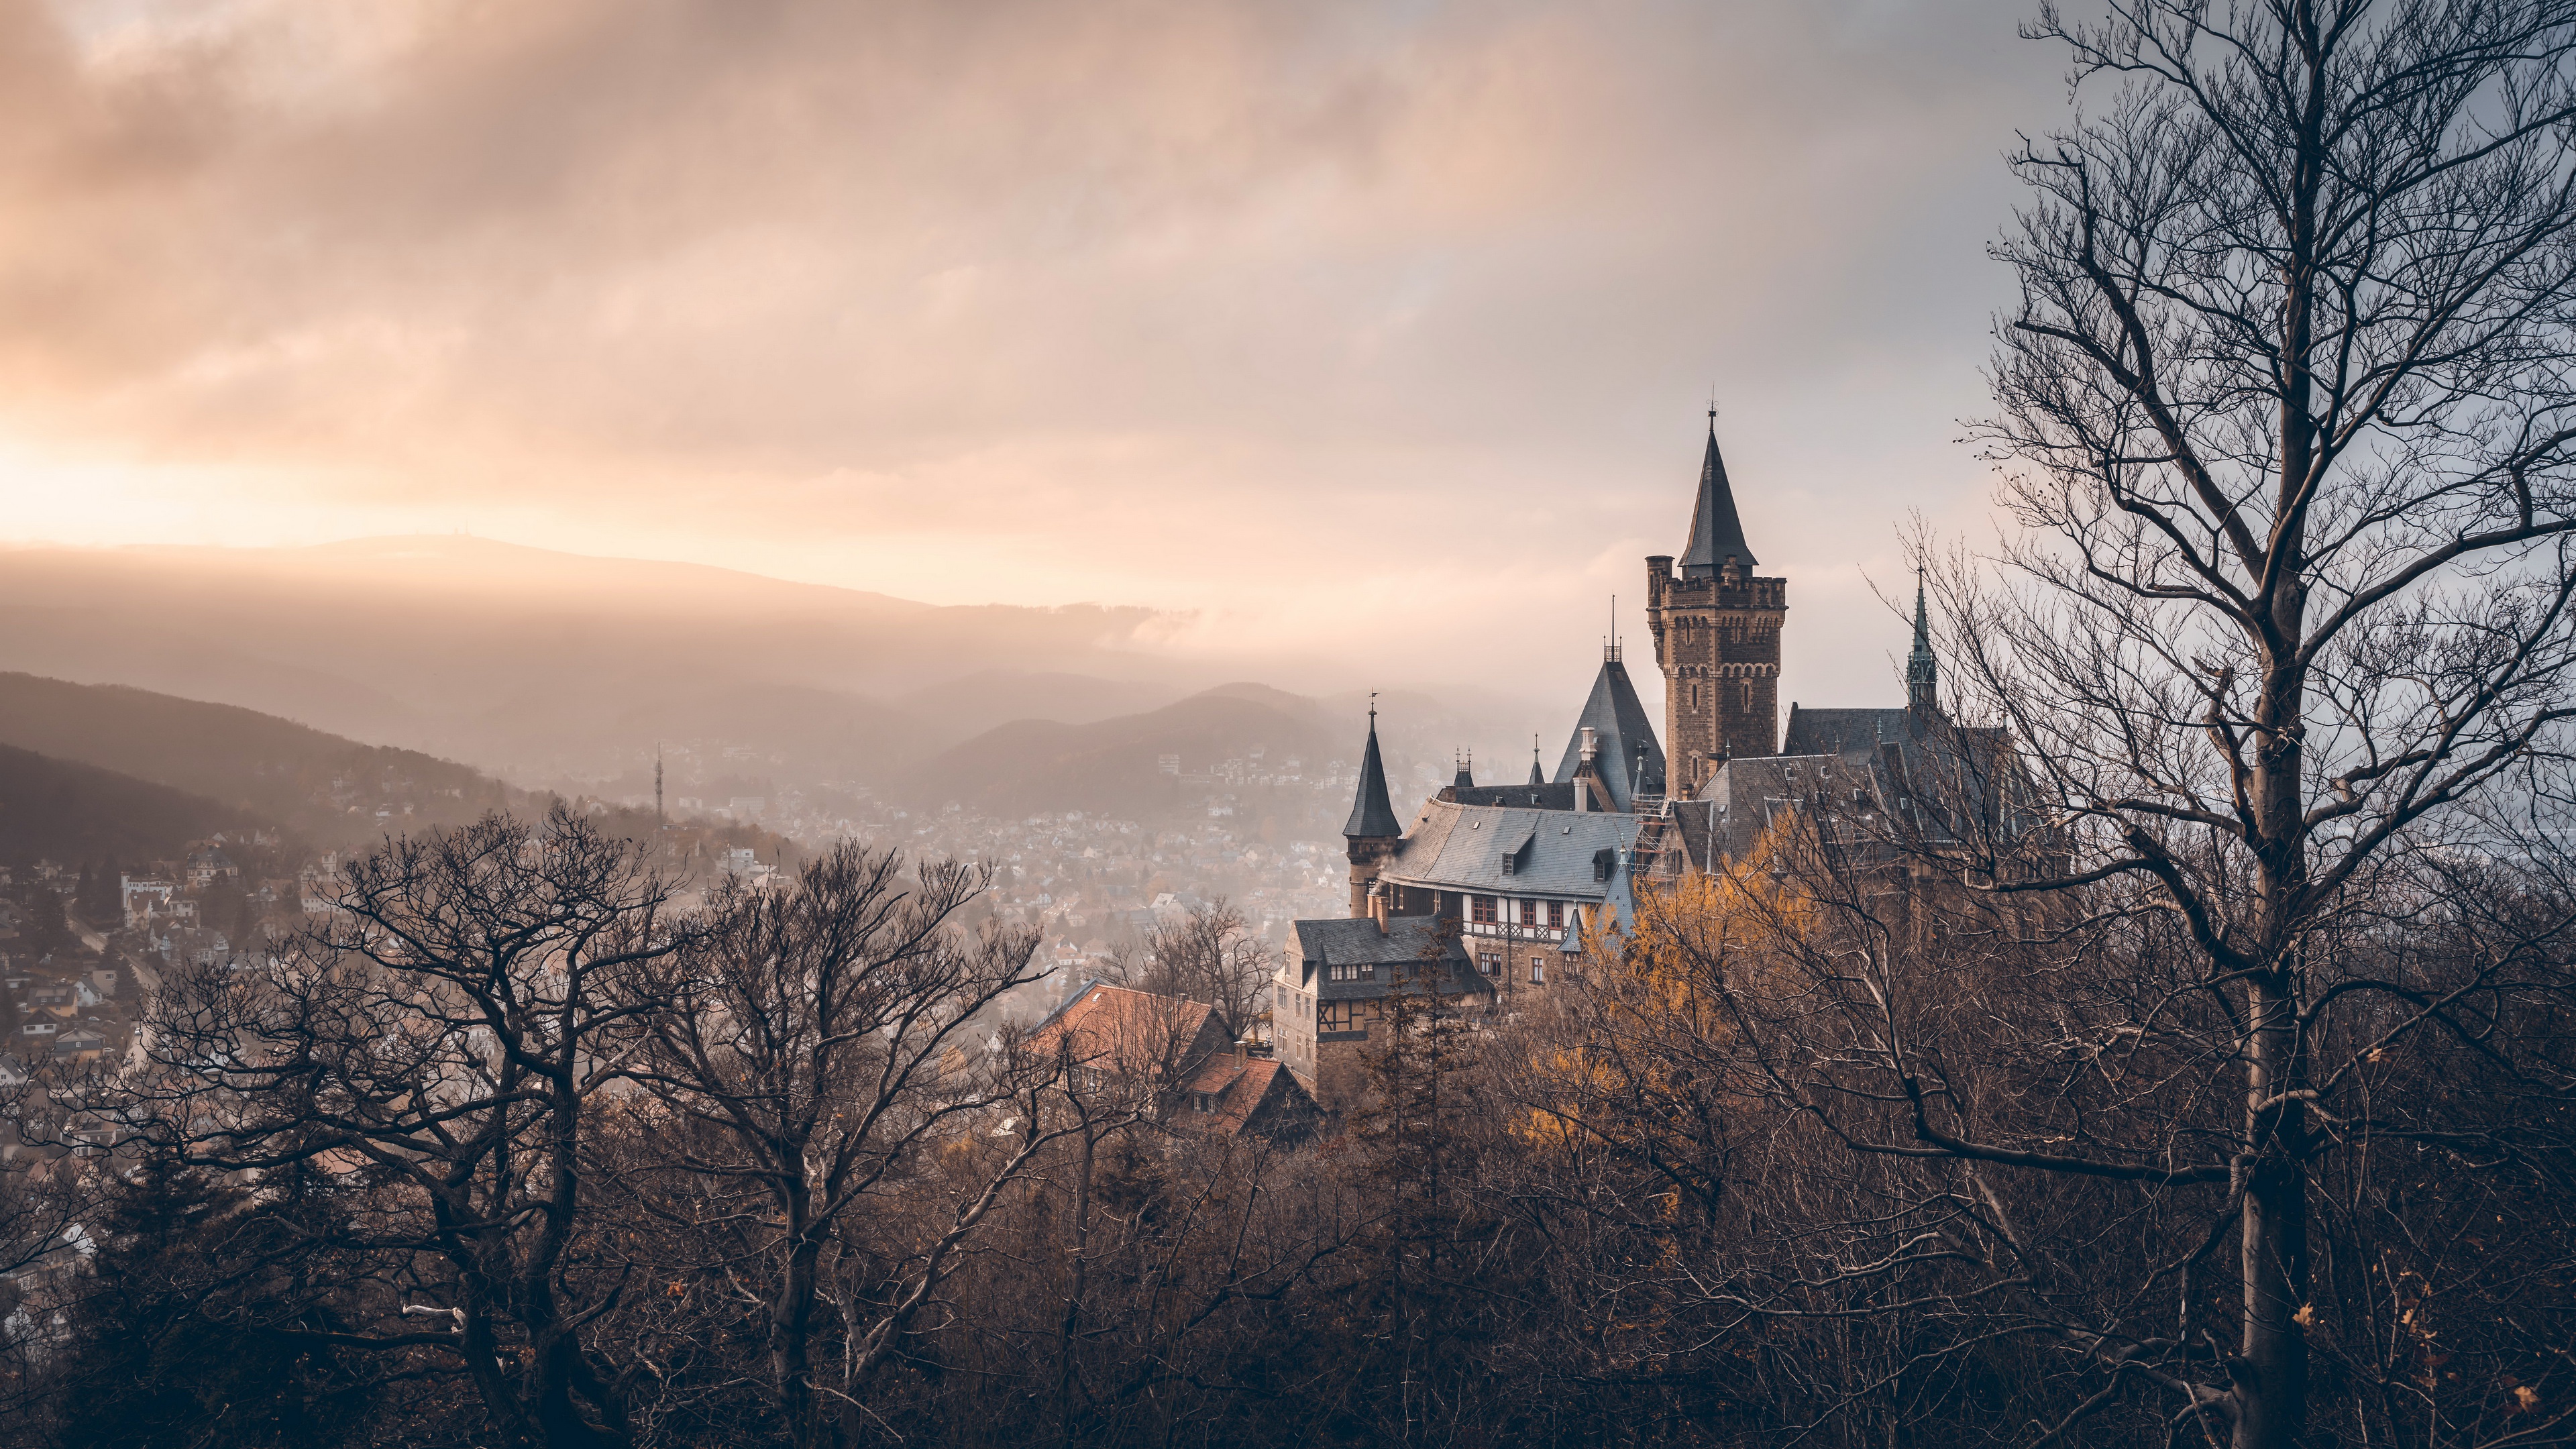 Mobile wallpaper: Castles, Germany, Man Made, Castle, Wernigerode,  Wernigerode Castle, 493936 download the picture for free.